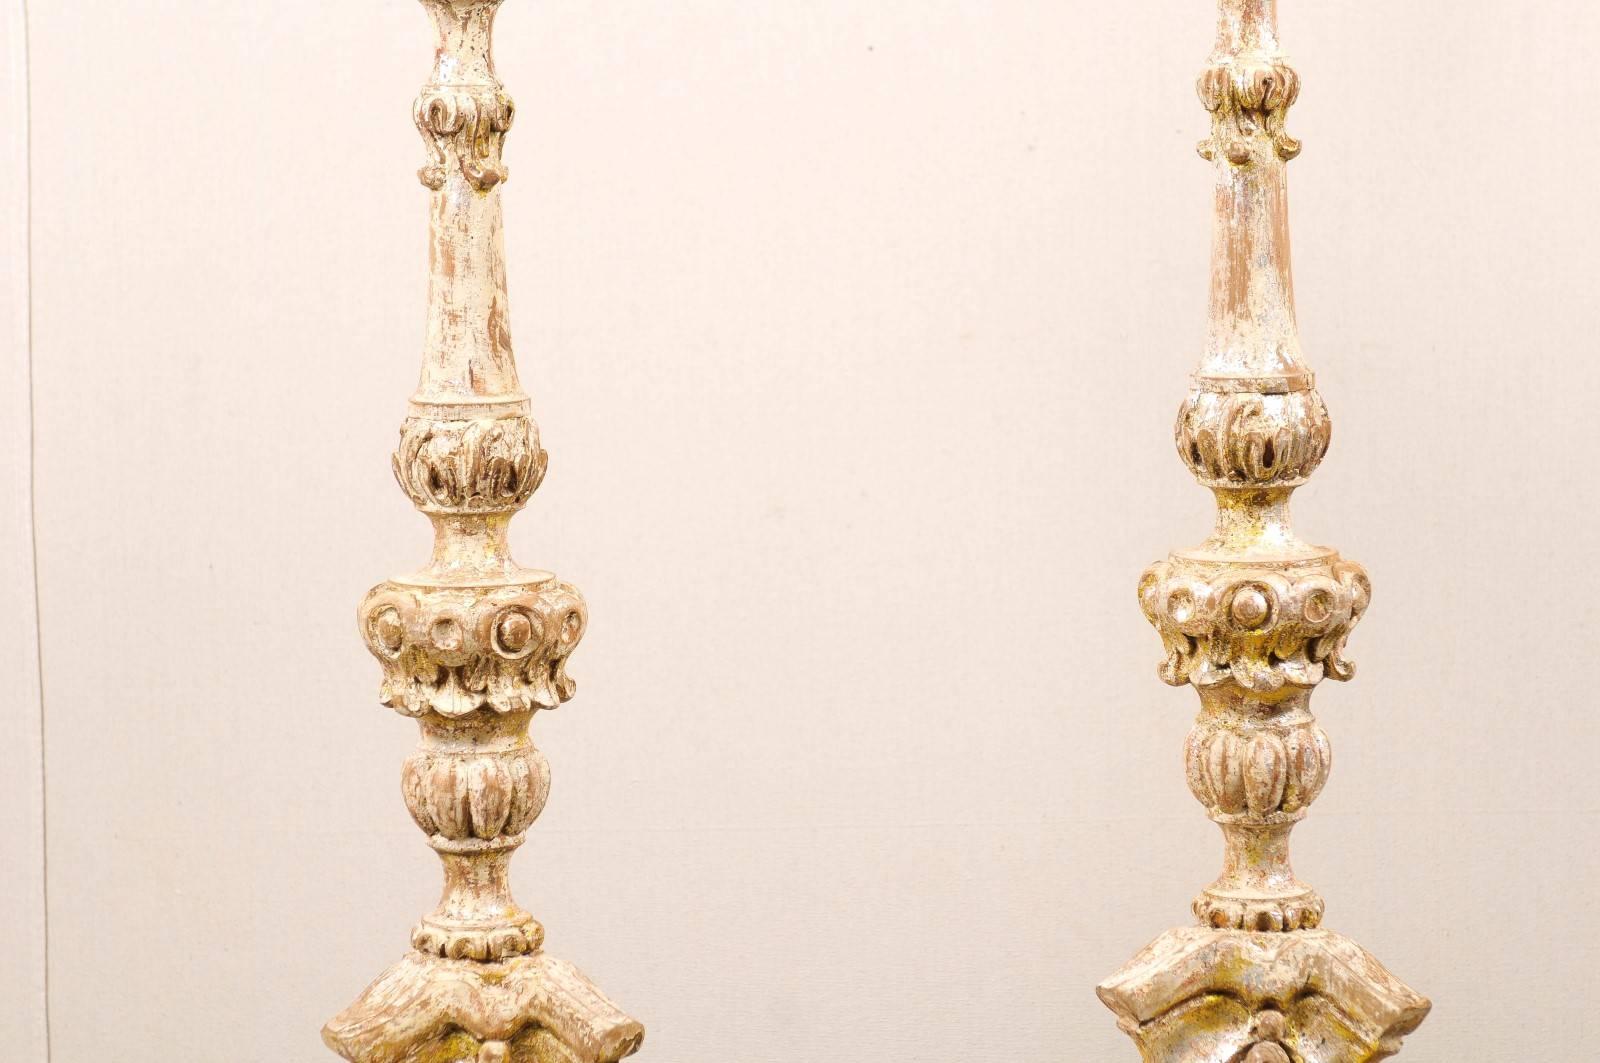 Pair of Table Lamps Made from 19th Century Wood Altar Sticks, Silver Finish 3